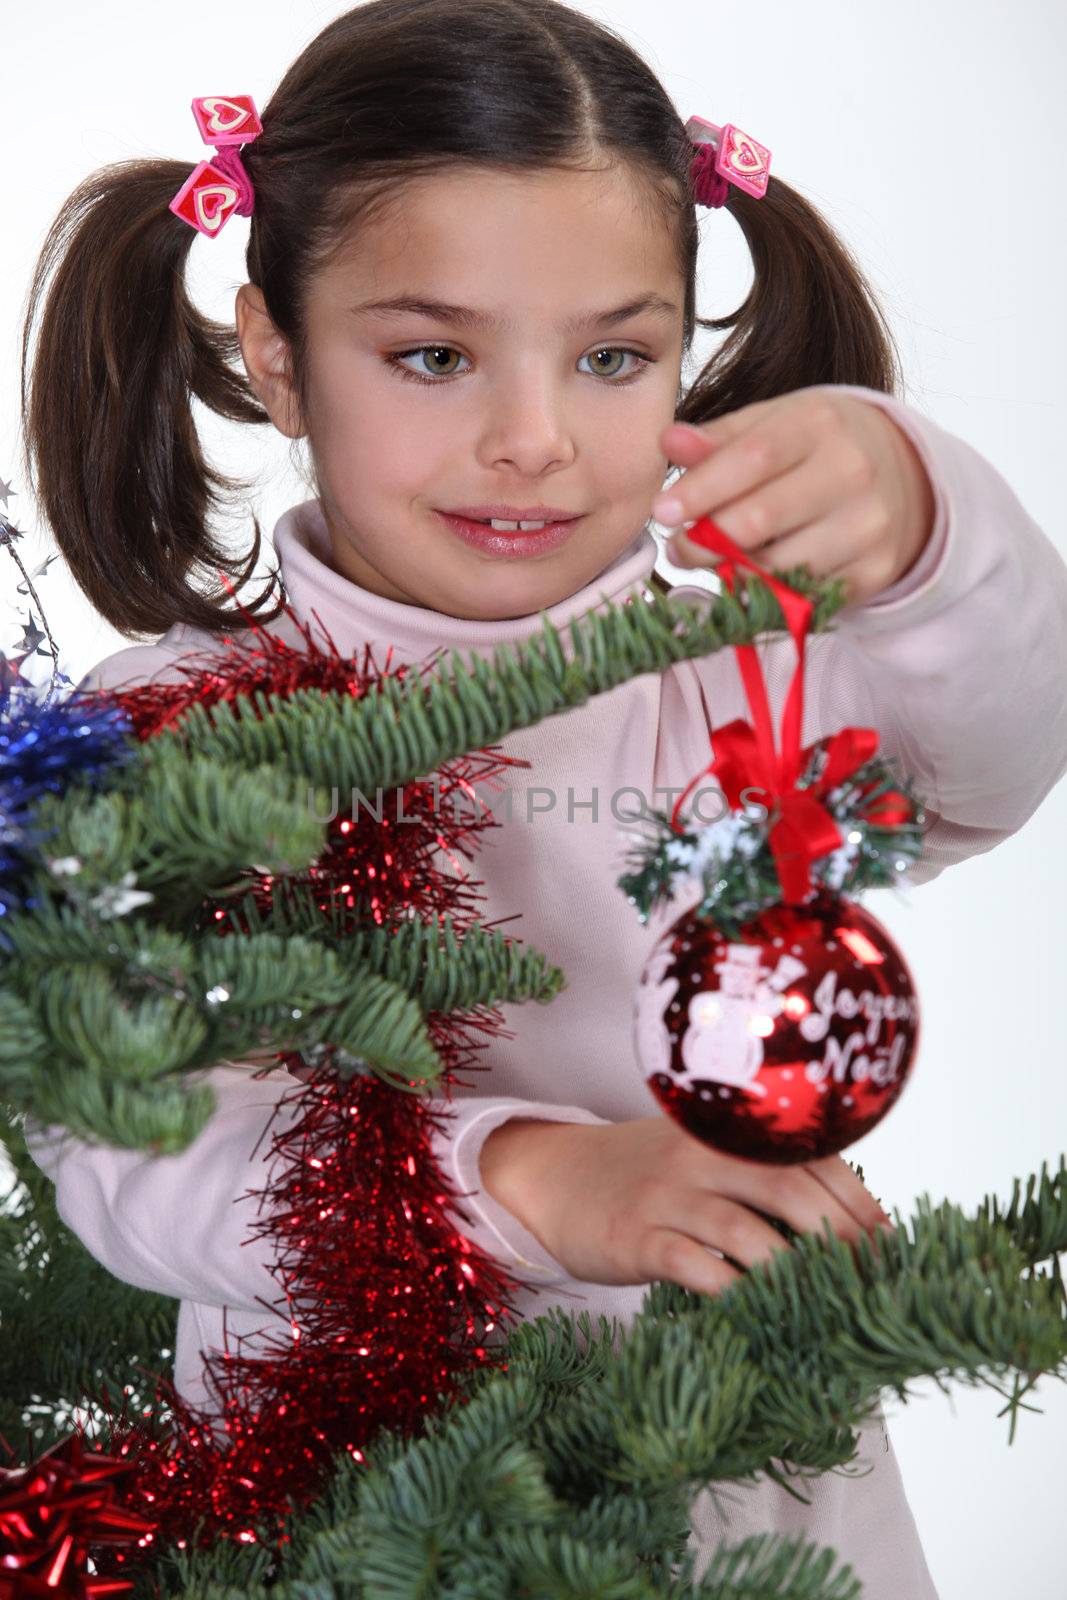 Young girl decorating a Christmas tree by phovoir